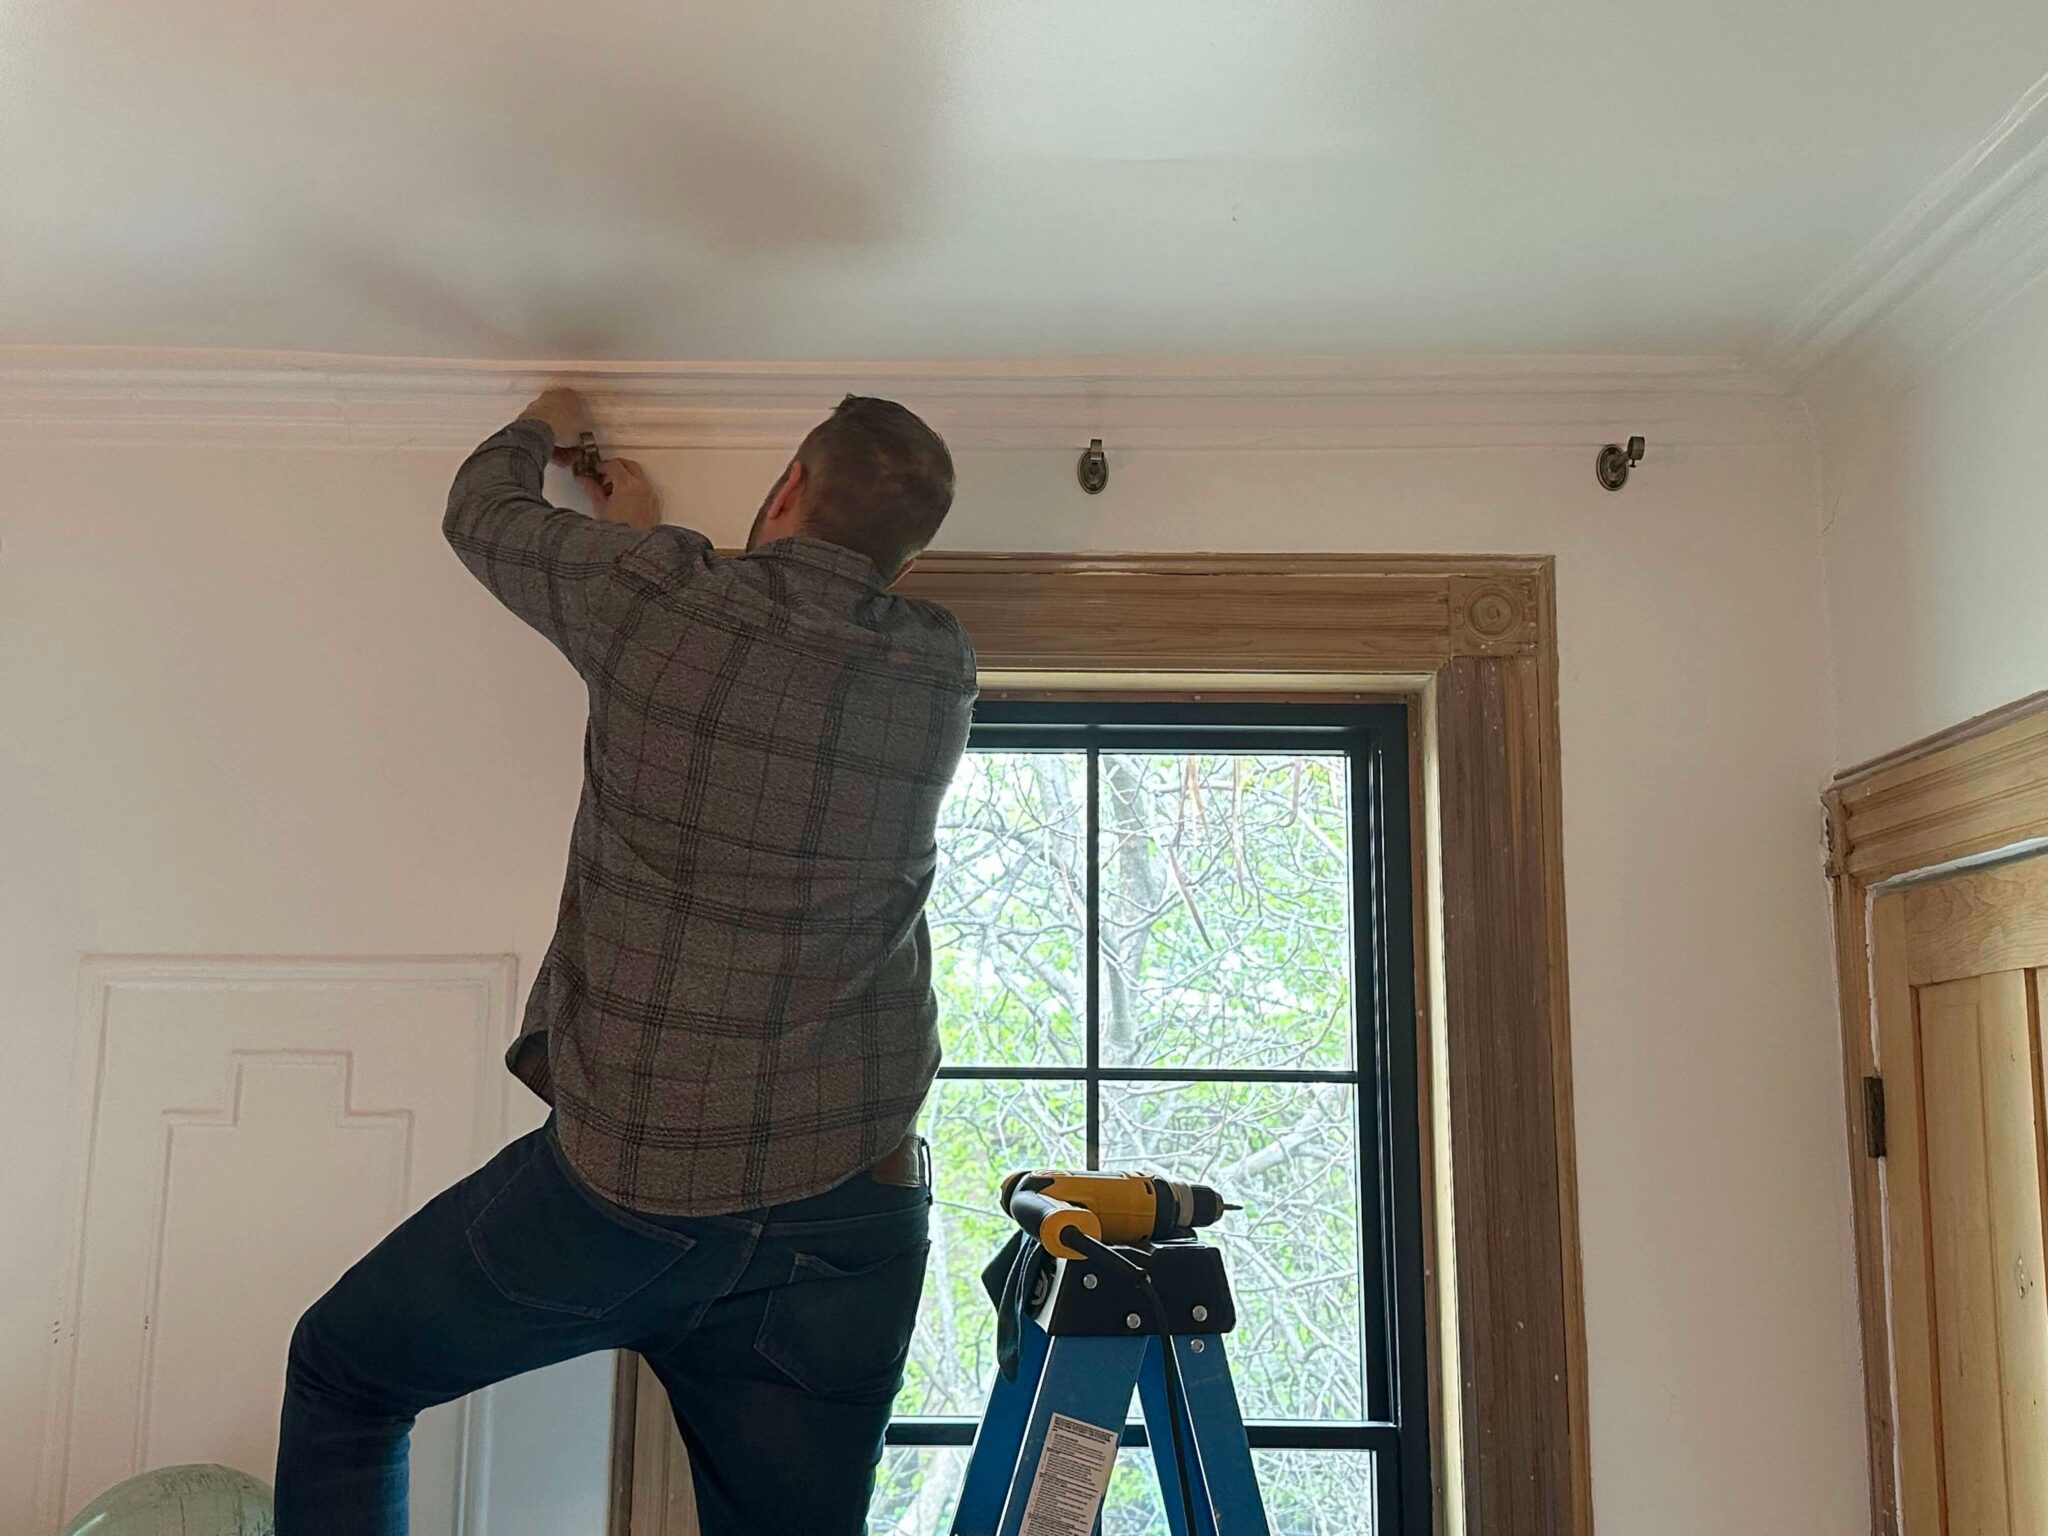 A man installs metal curtain brackets above a window with brown wooden molding. He is standing on a ladder.